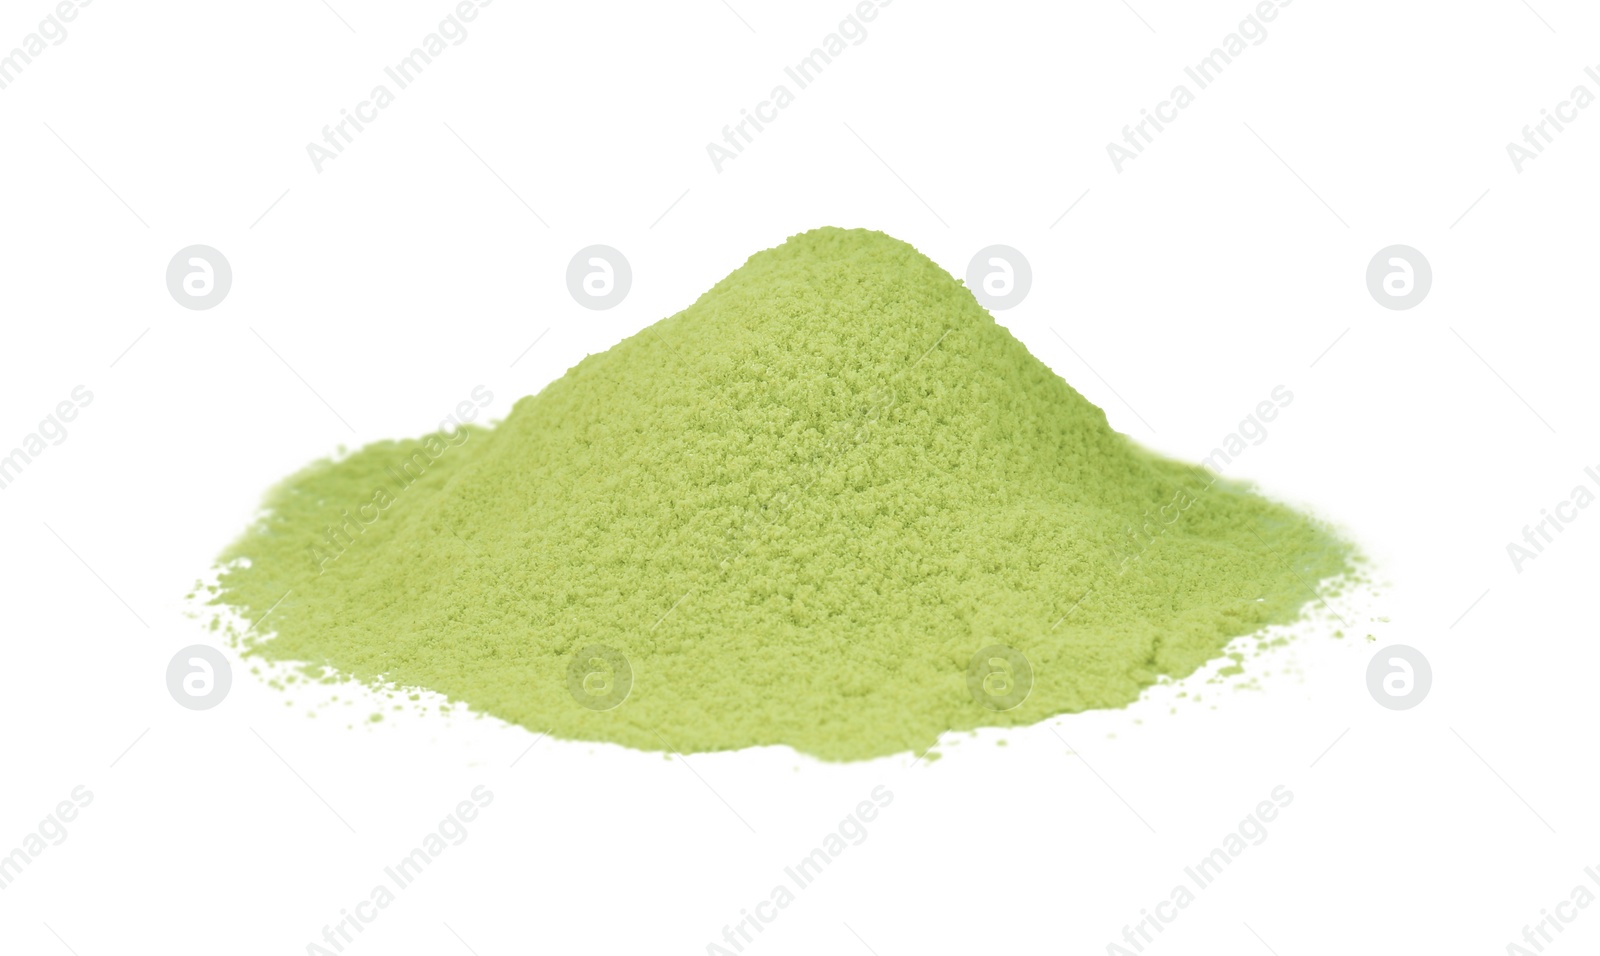 Photo of Pile of dry celery powder isolated on white